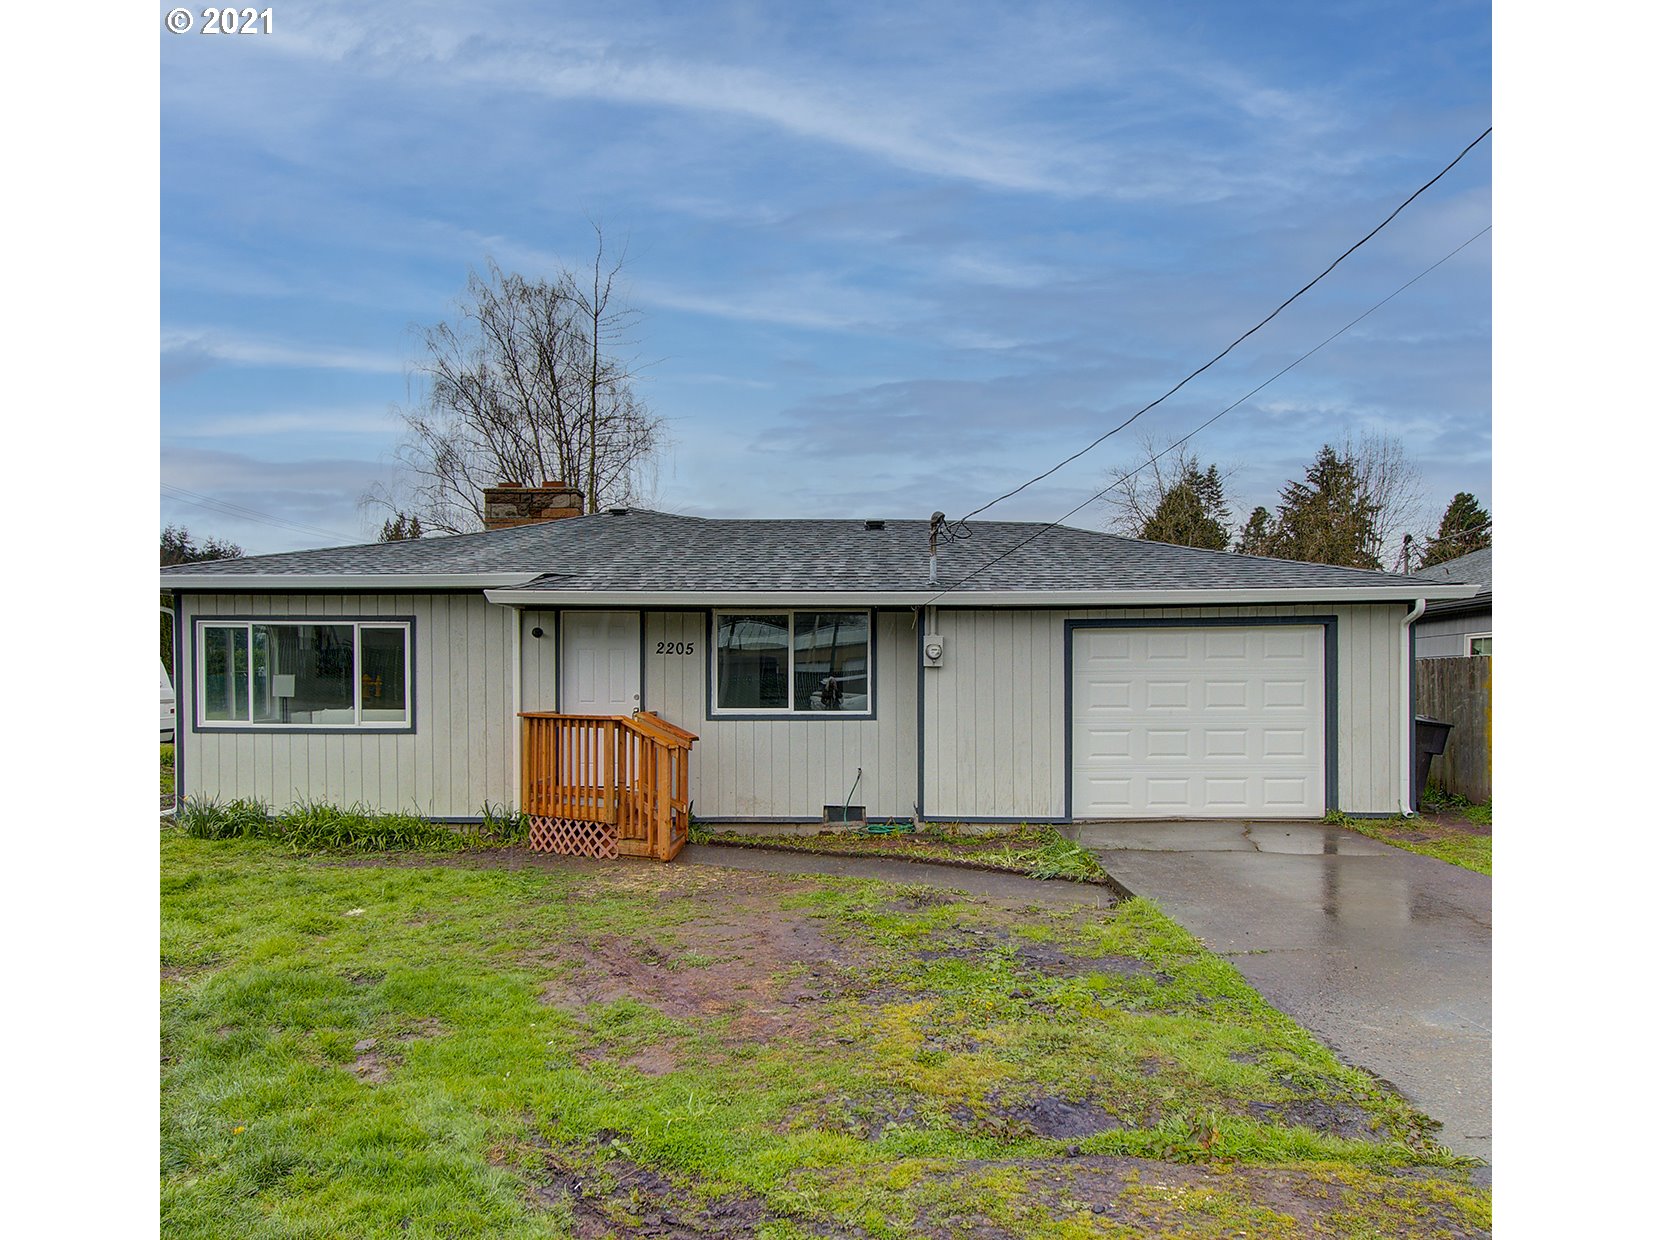 2205 42ND AVE (1 of 25)